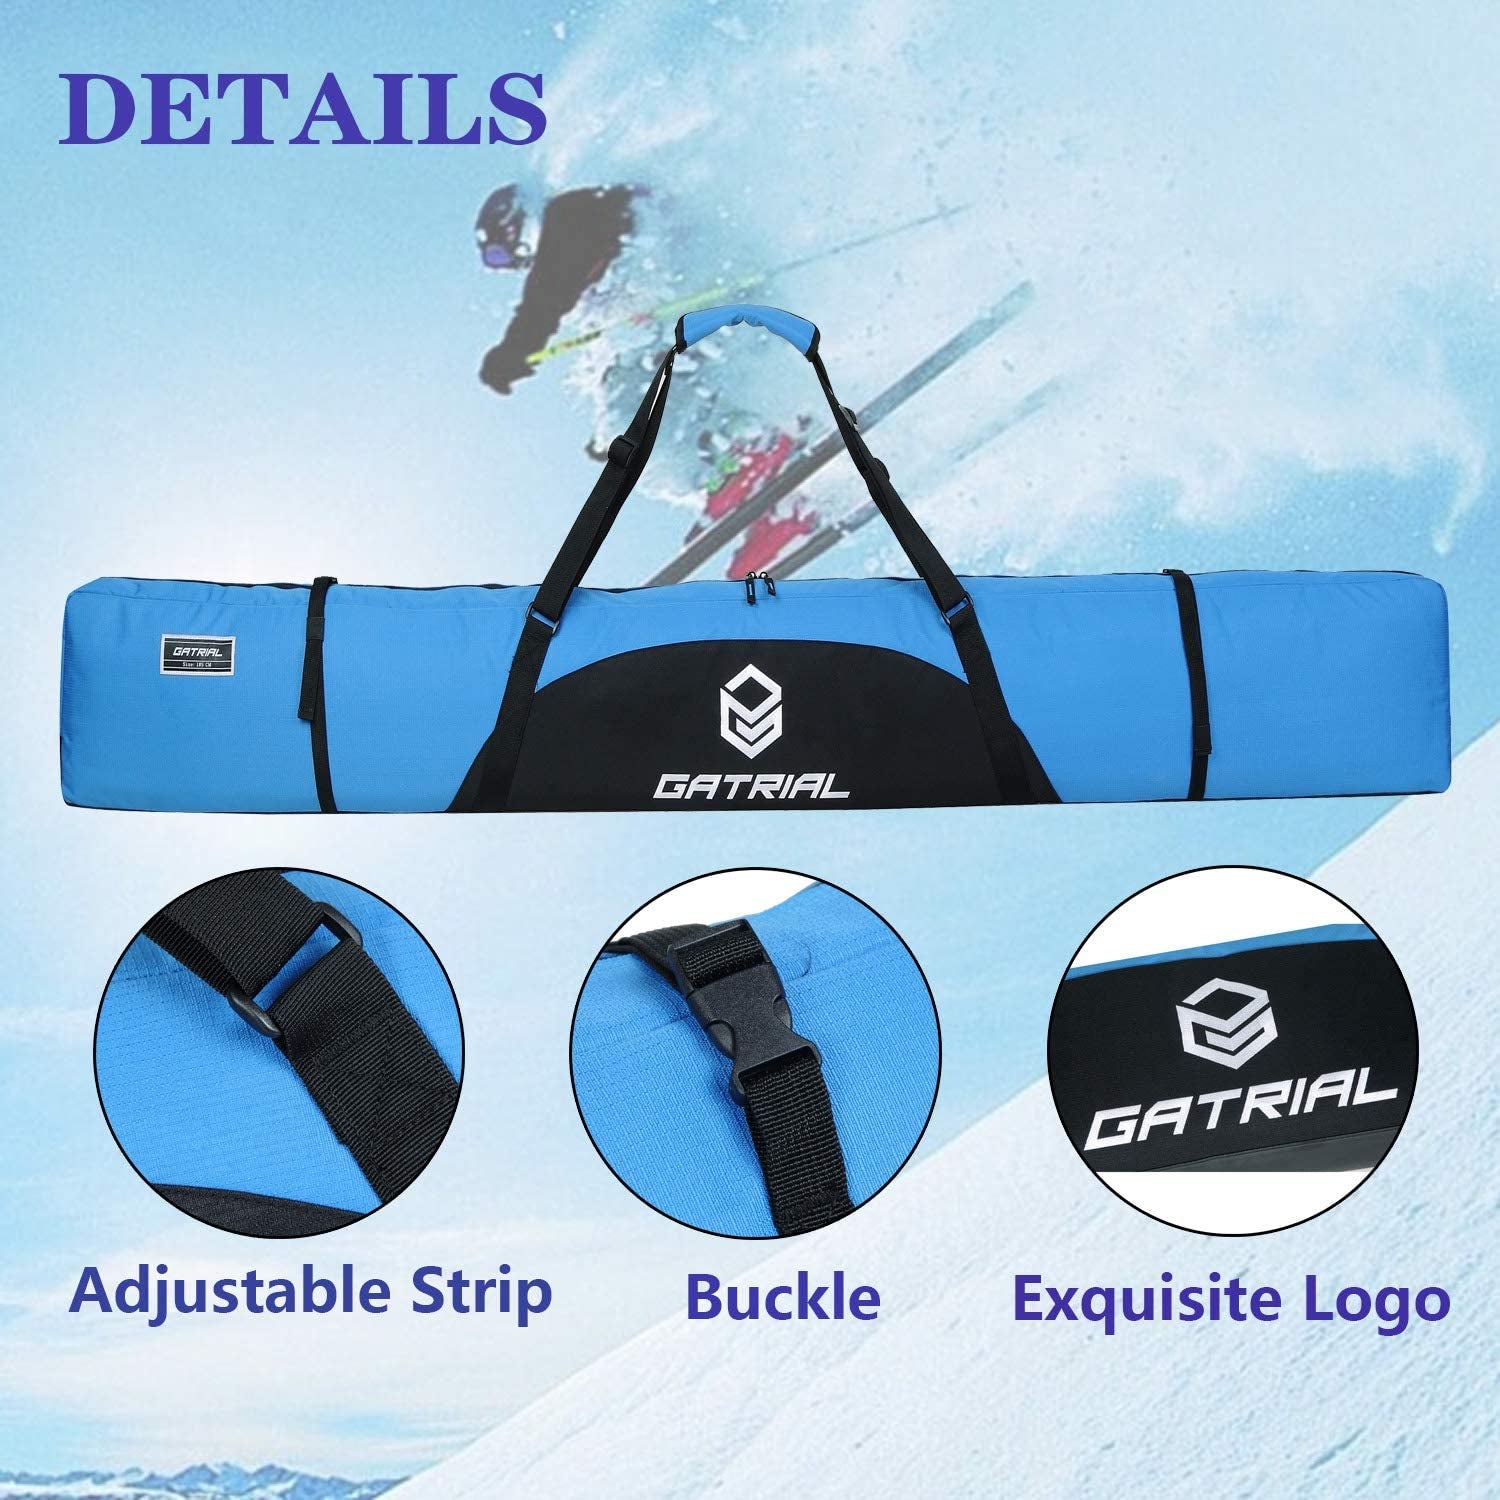 G GATRIAL Snow Padded Ski Bags for Air Travel - Single Ski Carry Bags for Cross Country, Downhill, Ski Clothes, Snow Gear, Poles and Accessories for Ski Carrier Travel Luggage Case